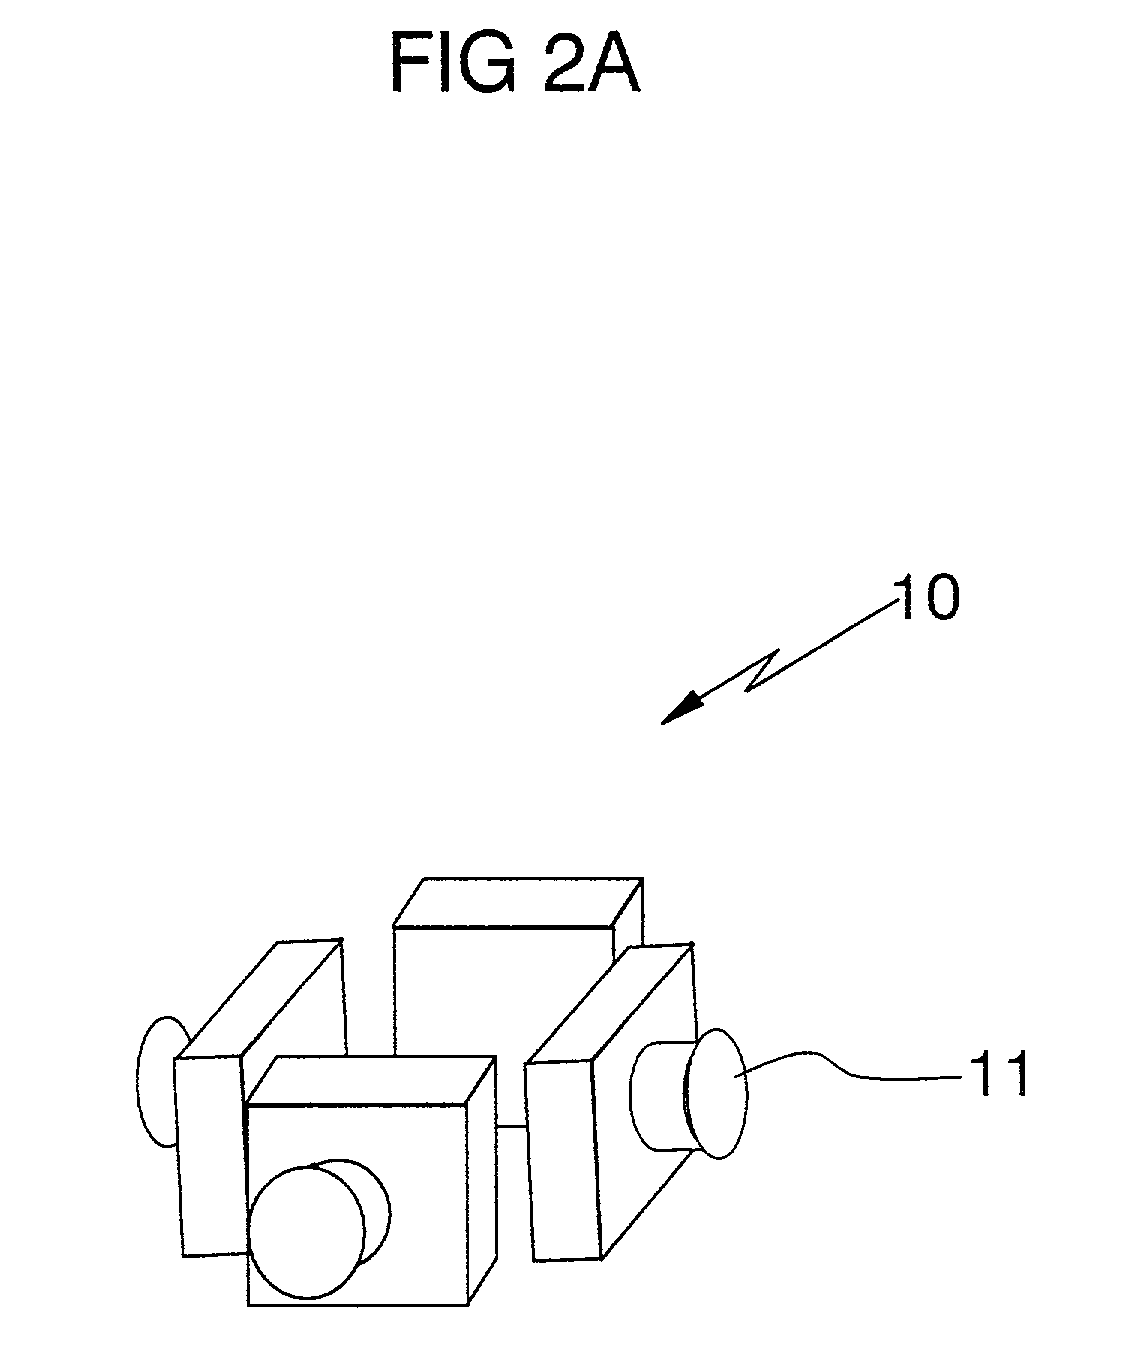 Method and apparatus for omni-directional image and 3-dimensional data acquisition with data annotation and dynamic range extension method